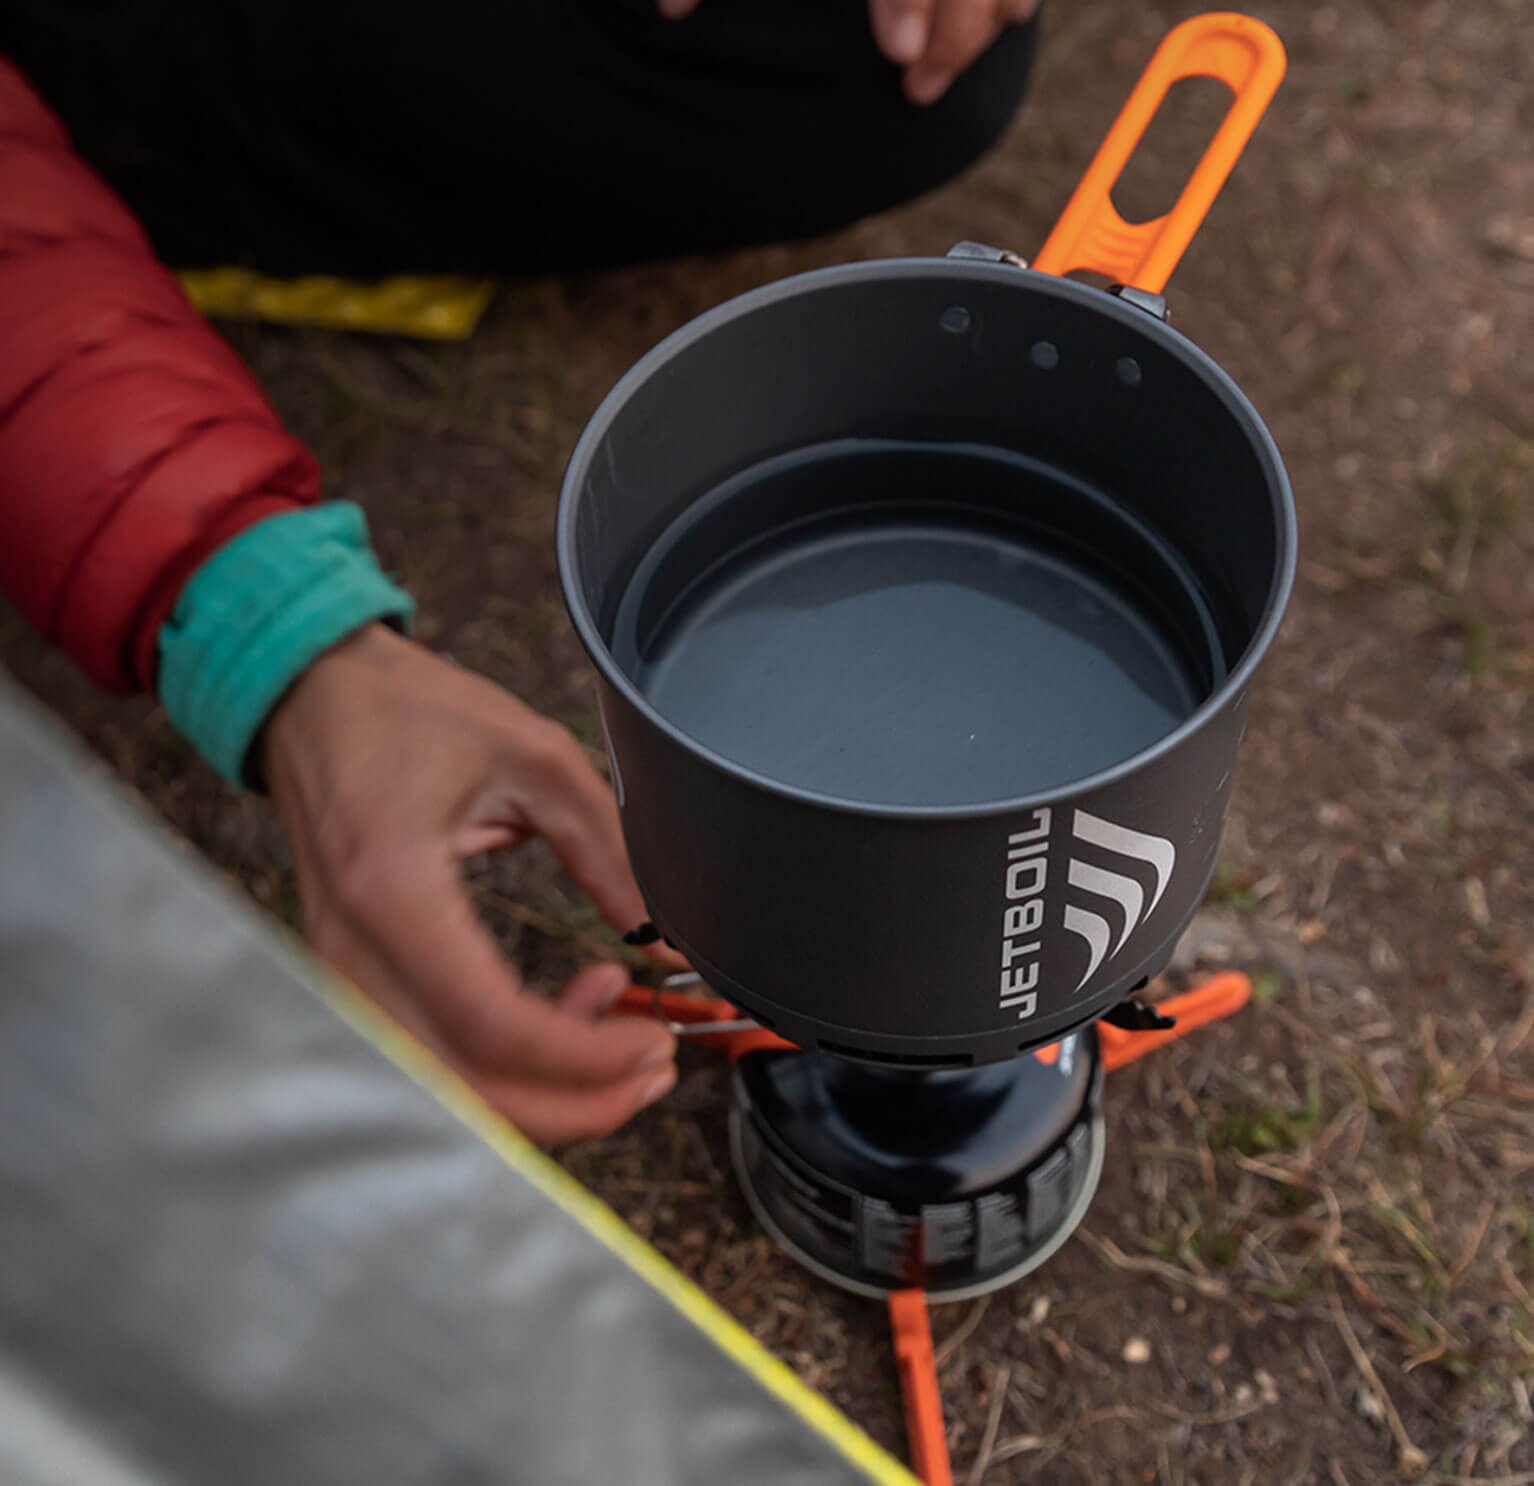 Igniting the Jetboil Stash Cooking System